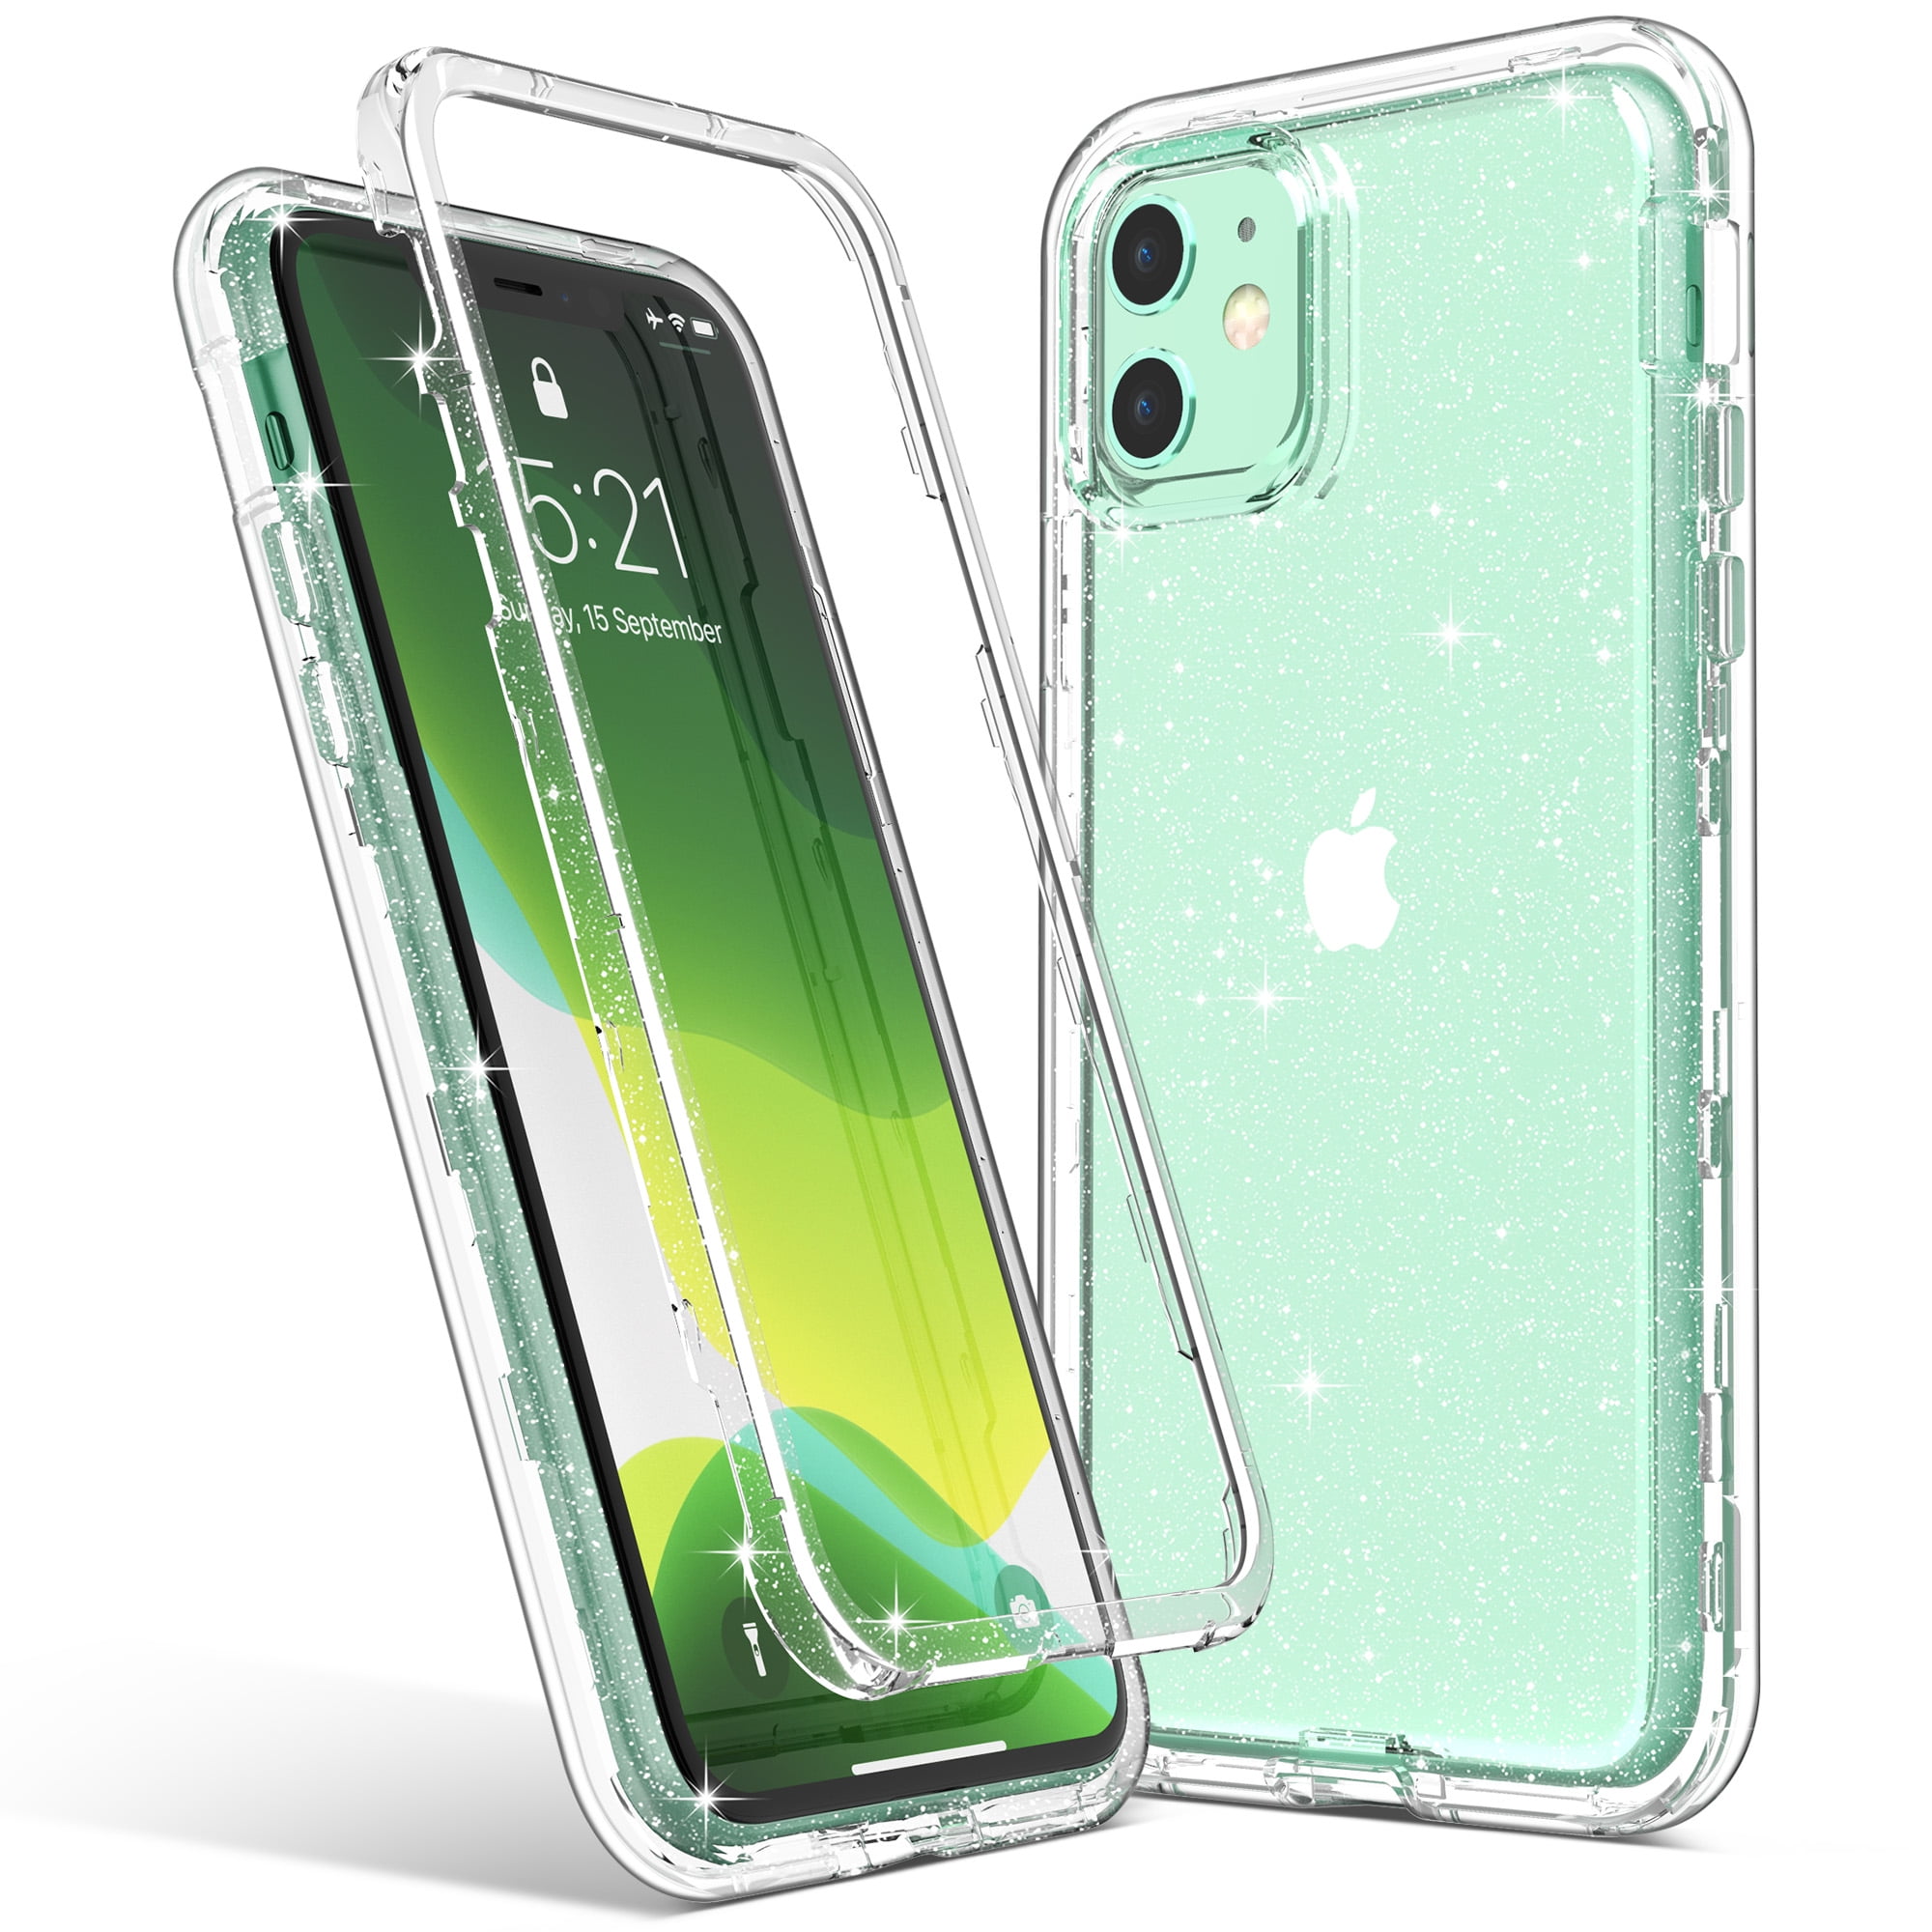 Ulak iPhone 12 Case, iPhone 12 Pro Case, Anti-Scratch Shockproof Bumper Slim Phone Case for Apple iPhone 12 / 12 Pro, Crystal Clear, Size: 6.1